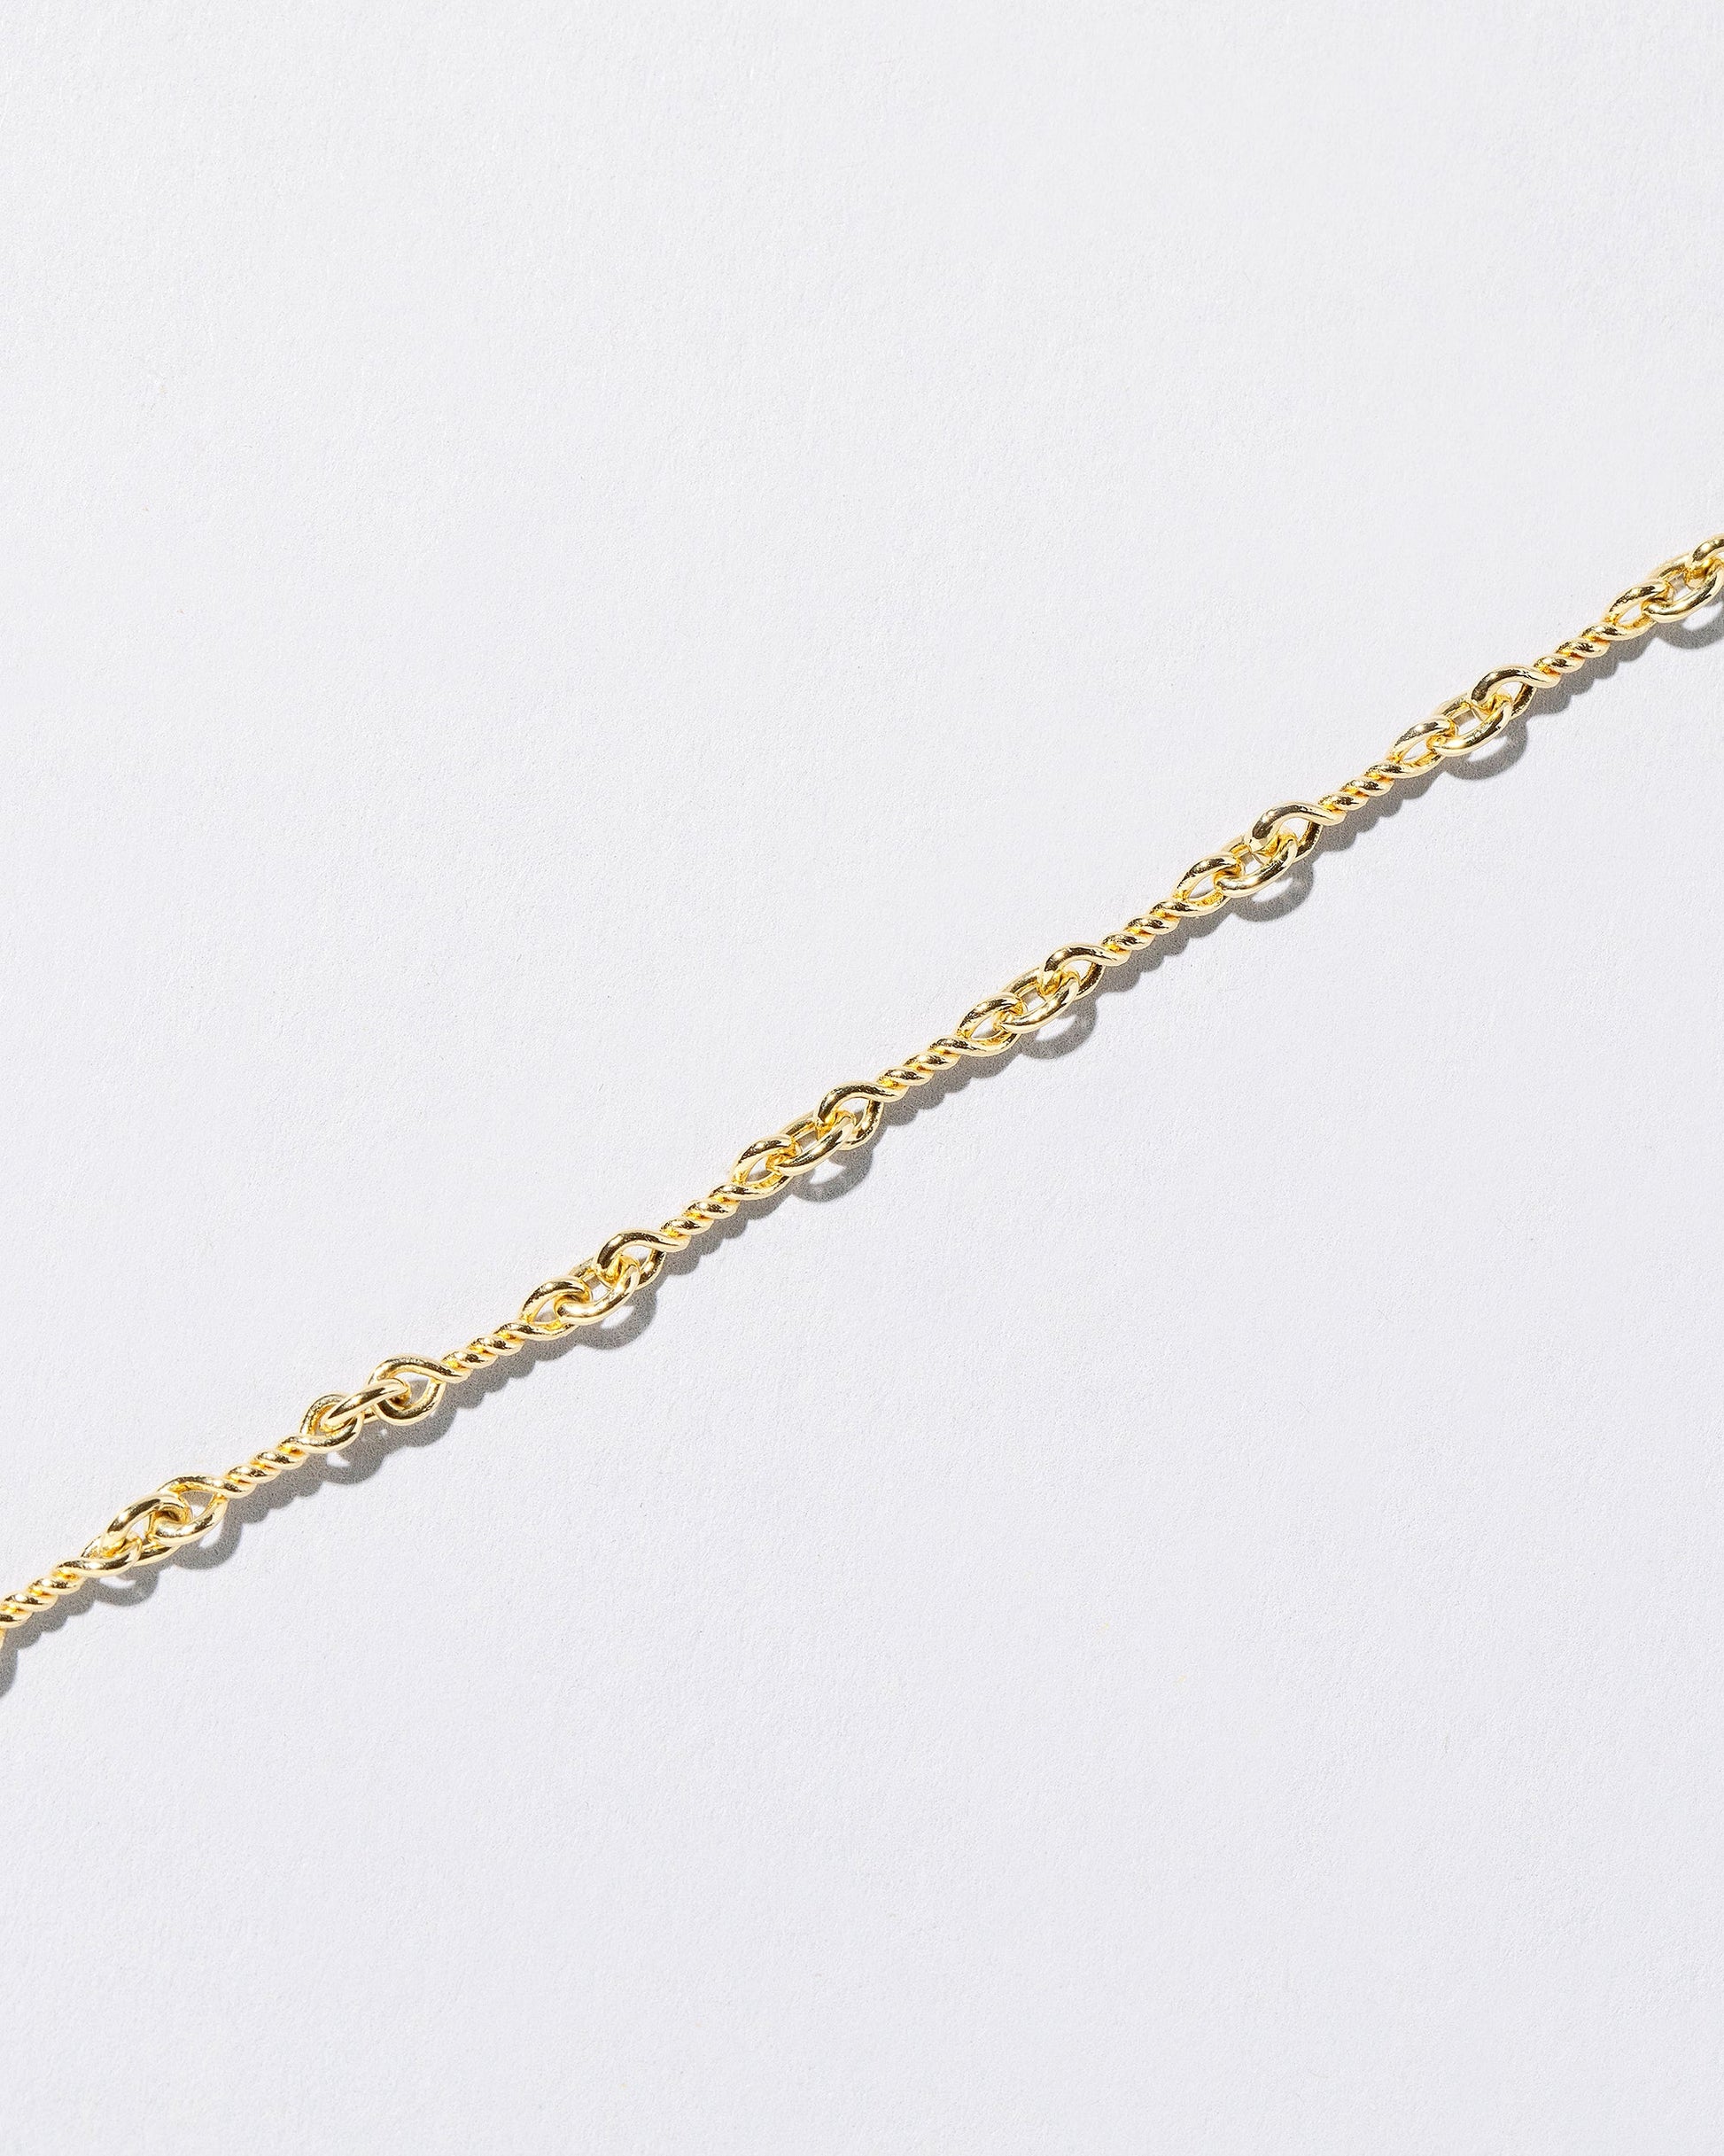 Closeup detail of the Twisted Chain Bracelet on light color background.